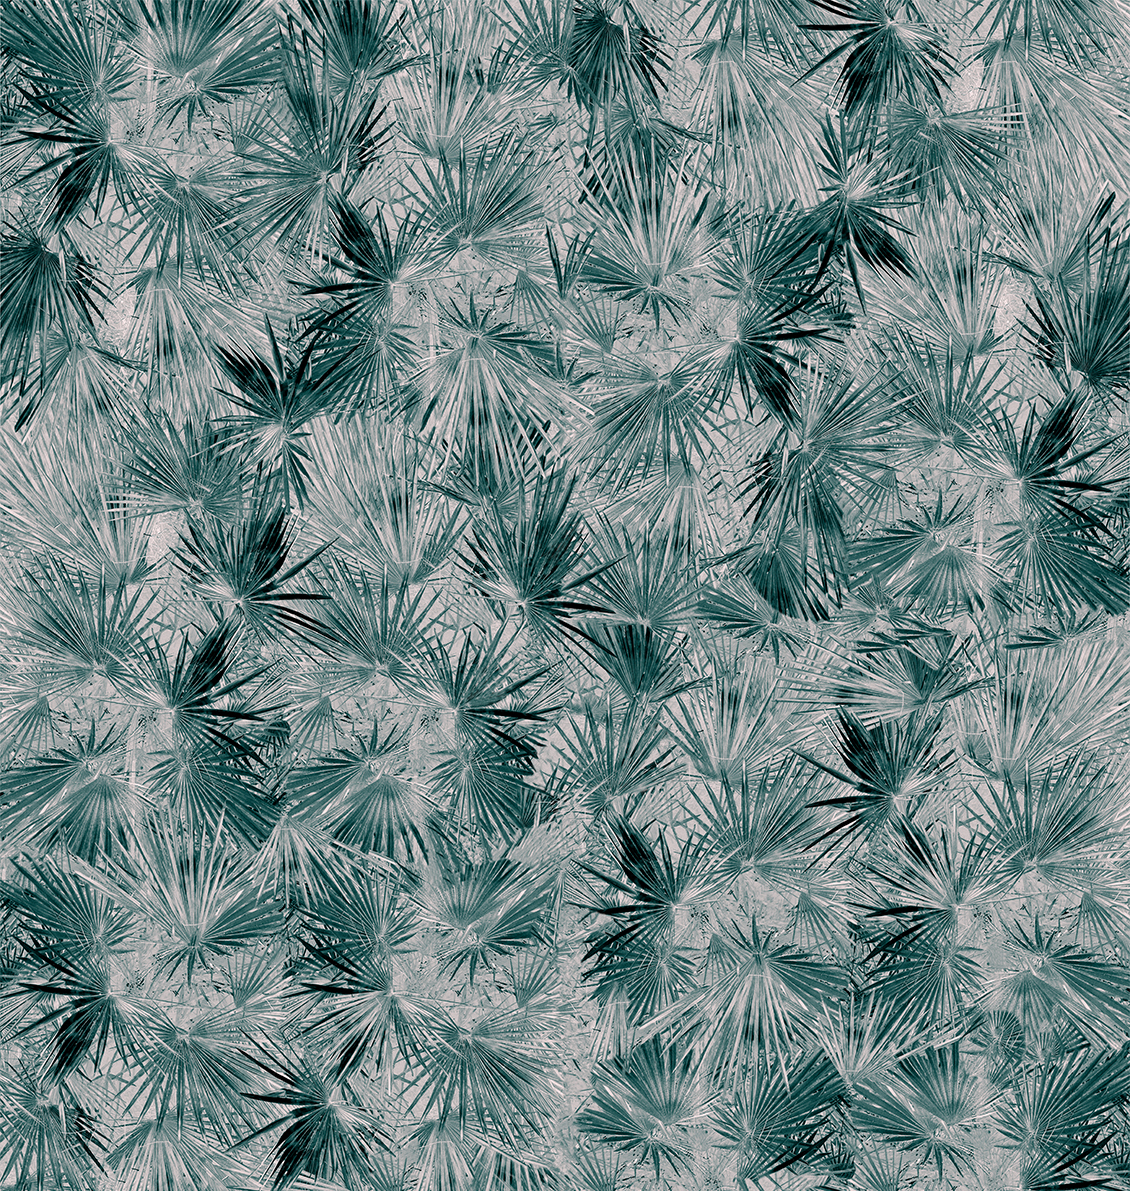 Exotic wallpaper with palm leaf design in various shades of green